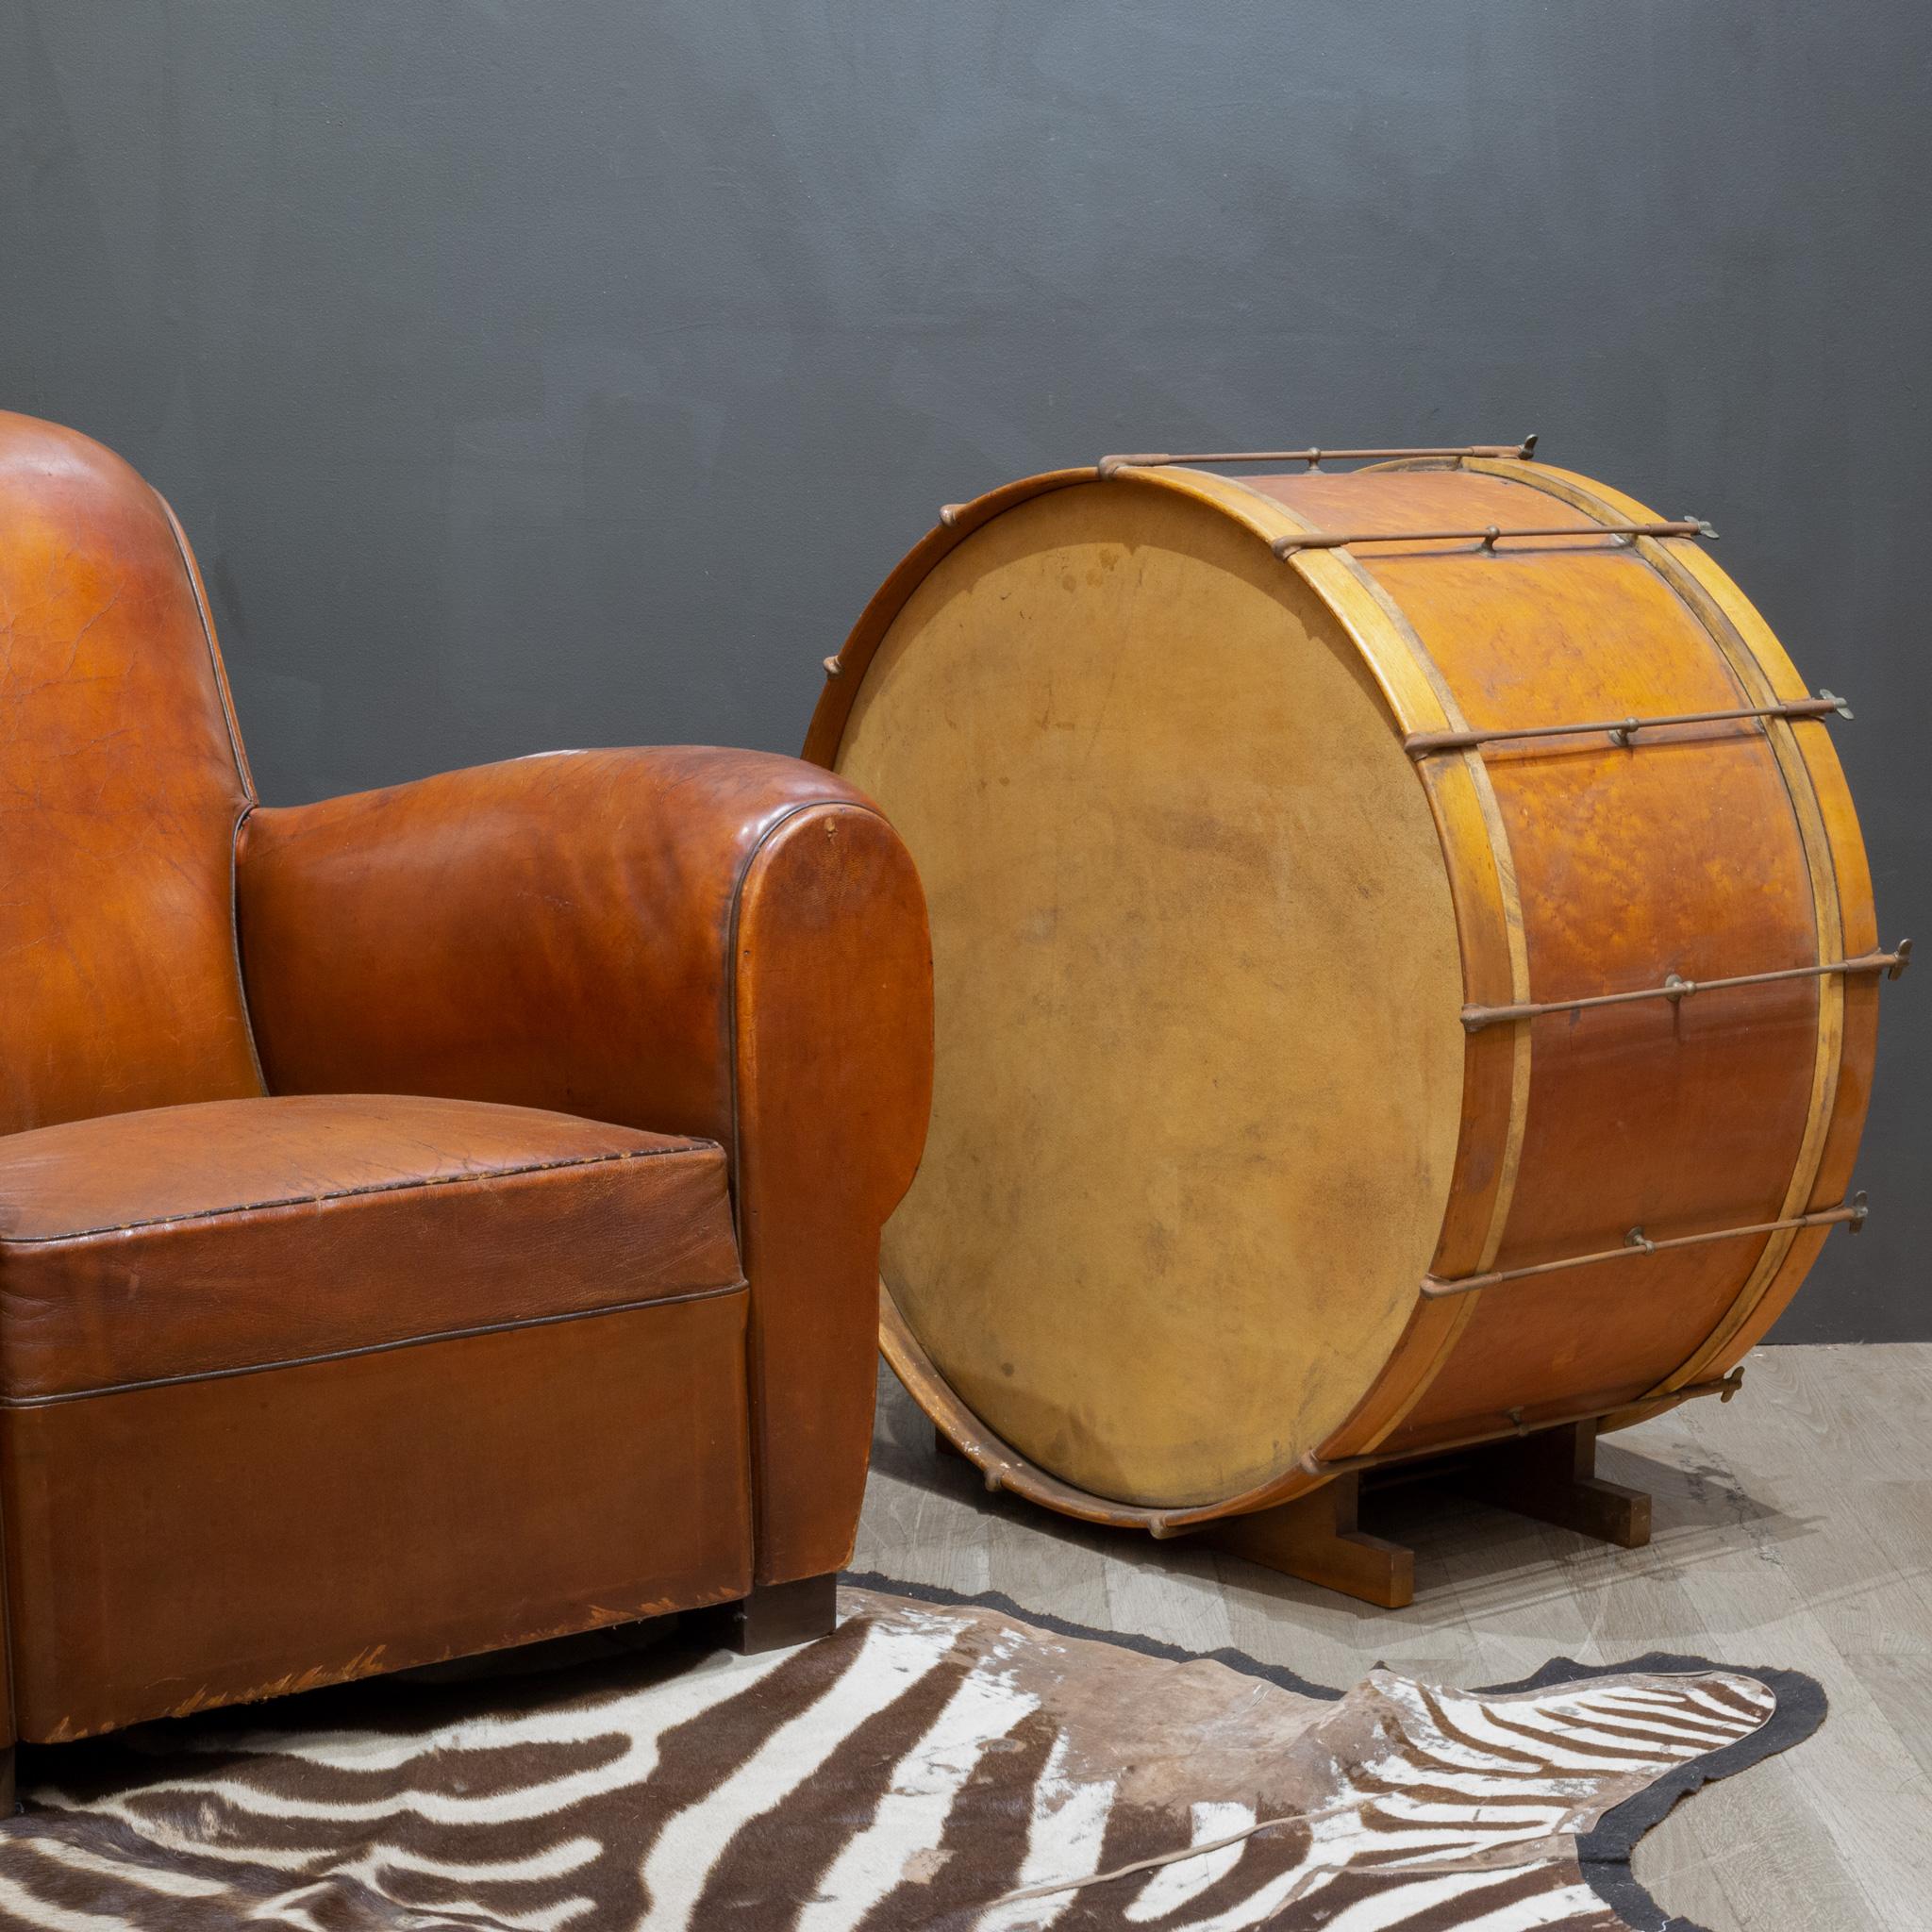 ABOUT

Antique stretched calfskin and wood drum with brass and metal stretchers. The calfskin has no cracks and is intact. The piece has retained its original finish and is in good condition with appropriate patina for its age. A wooden base was